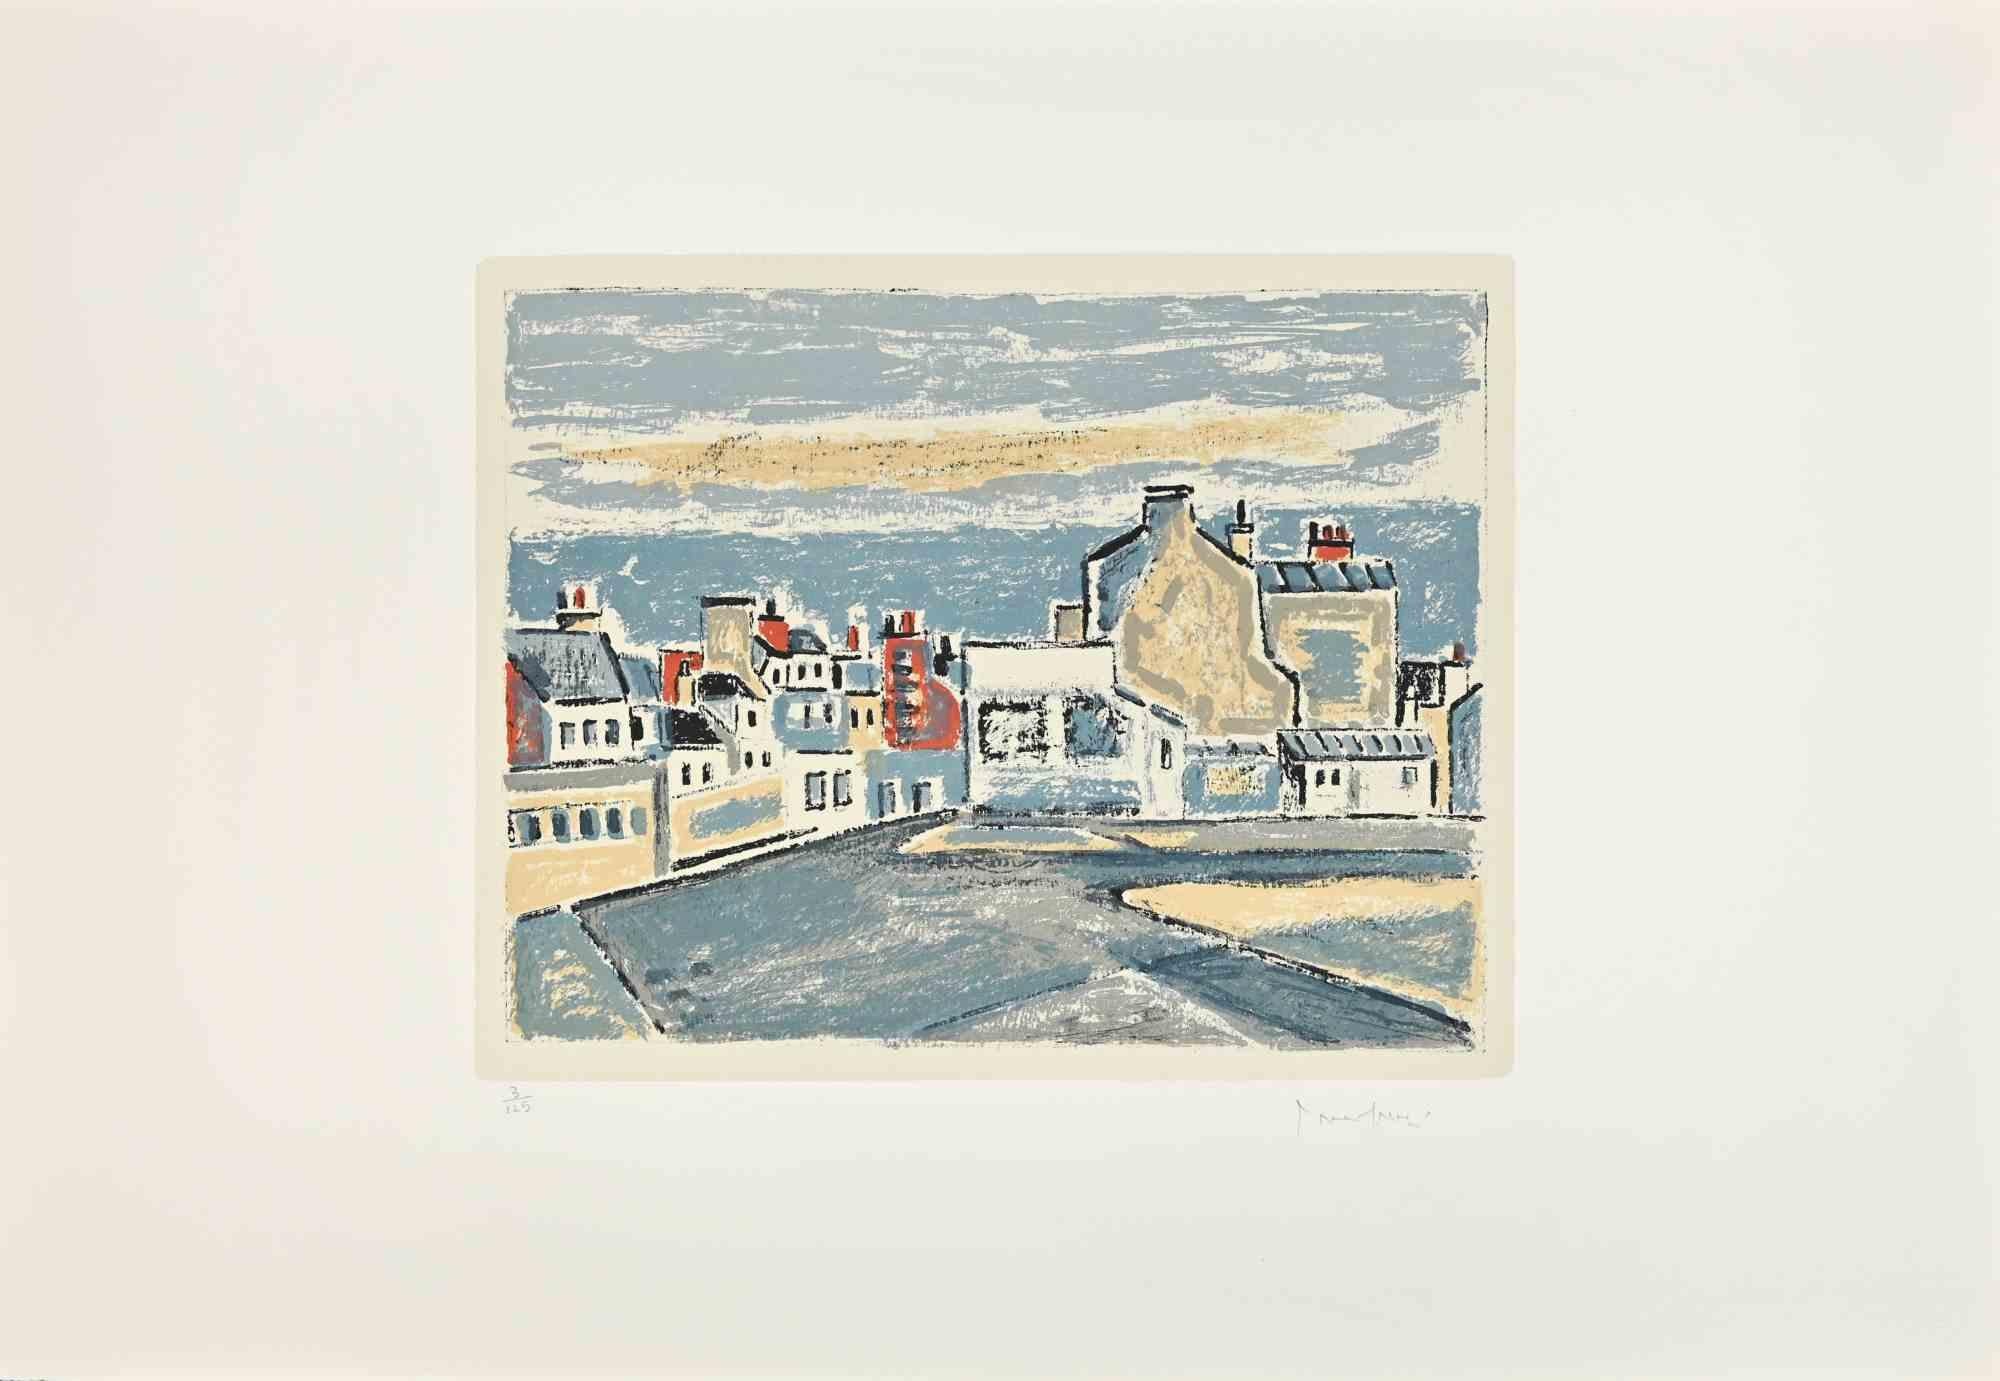 View of Paris is a Modern artwork realized by Orfeo Tamburi  (Jesi, 1910 – Paris,1994) in the 1970s. 

Colored Lithograph. 

Hand-signed.

Numbered on the lower, Edition, 125 prints.

Good conditions. 

Orfeo Tamburi (Jesi, Ancona,1910-Paris,1994)